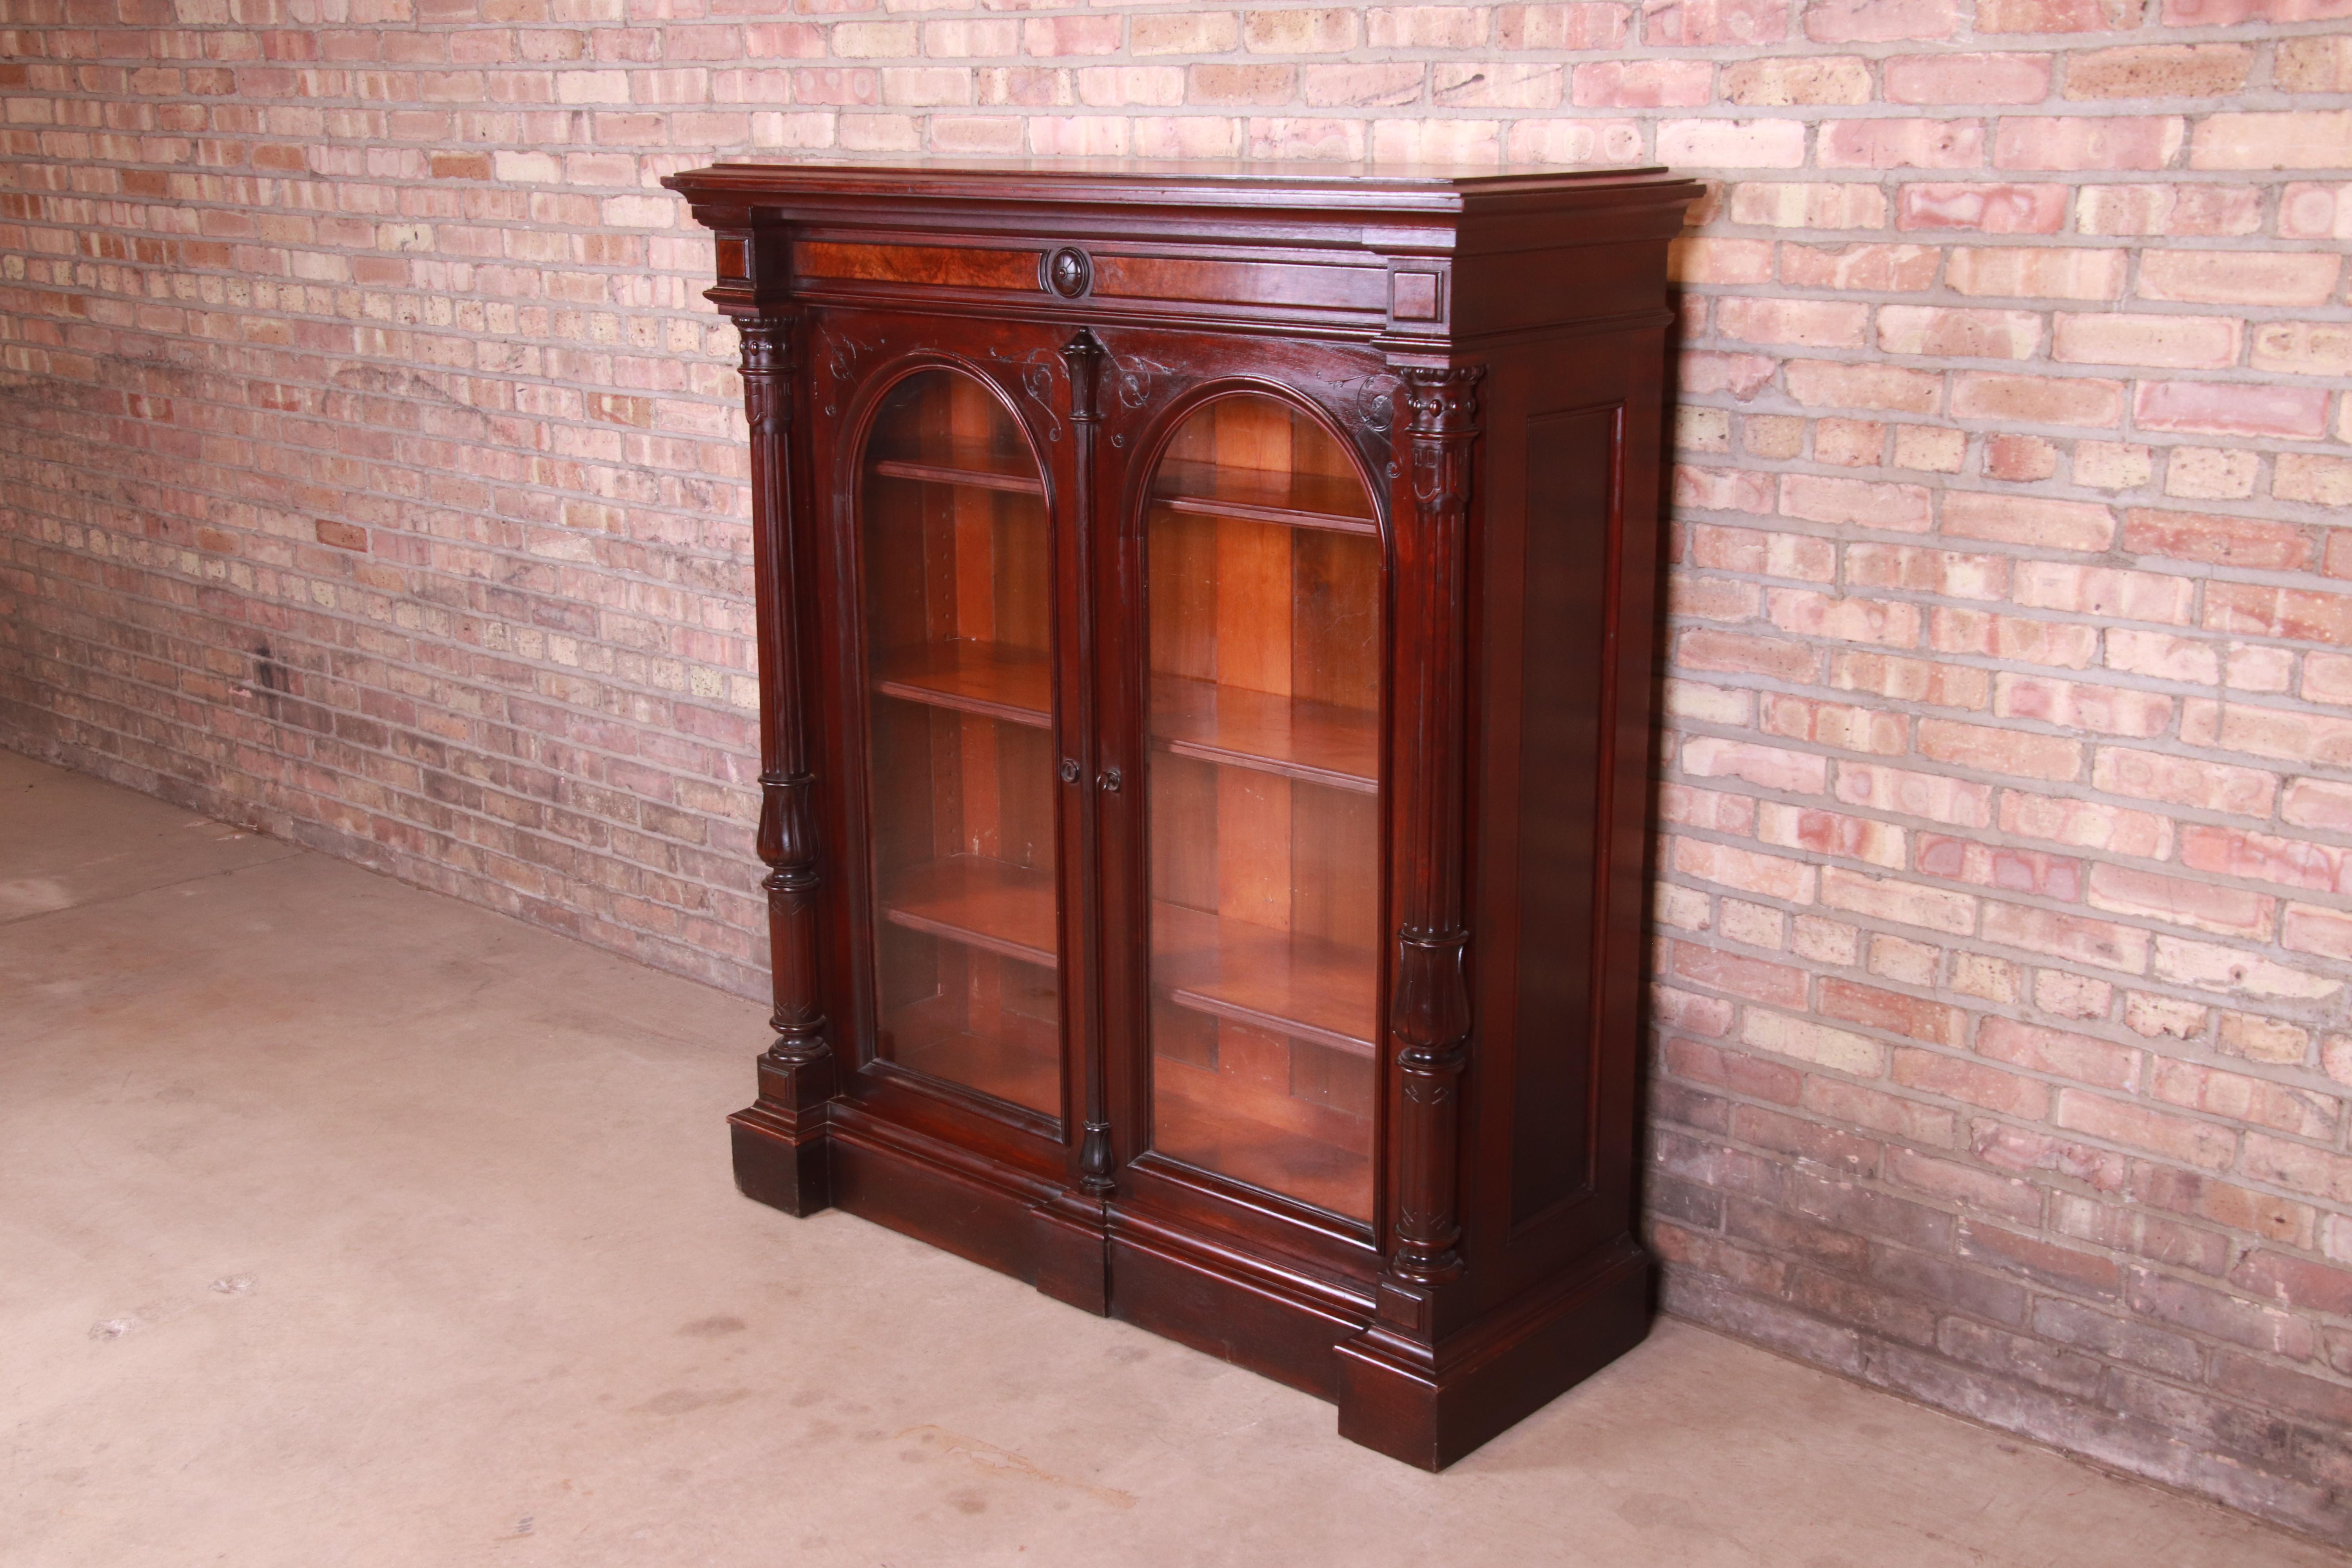 A gorgeous antique Eastlake Victorian bookcase

USA, Circa 1880s

Carved solid walnut, with burled walnut accents and glass front doors. Cabinet locks, and key is included.

Measures: 53.25